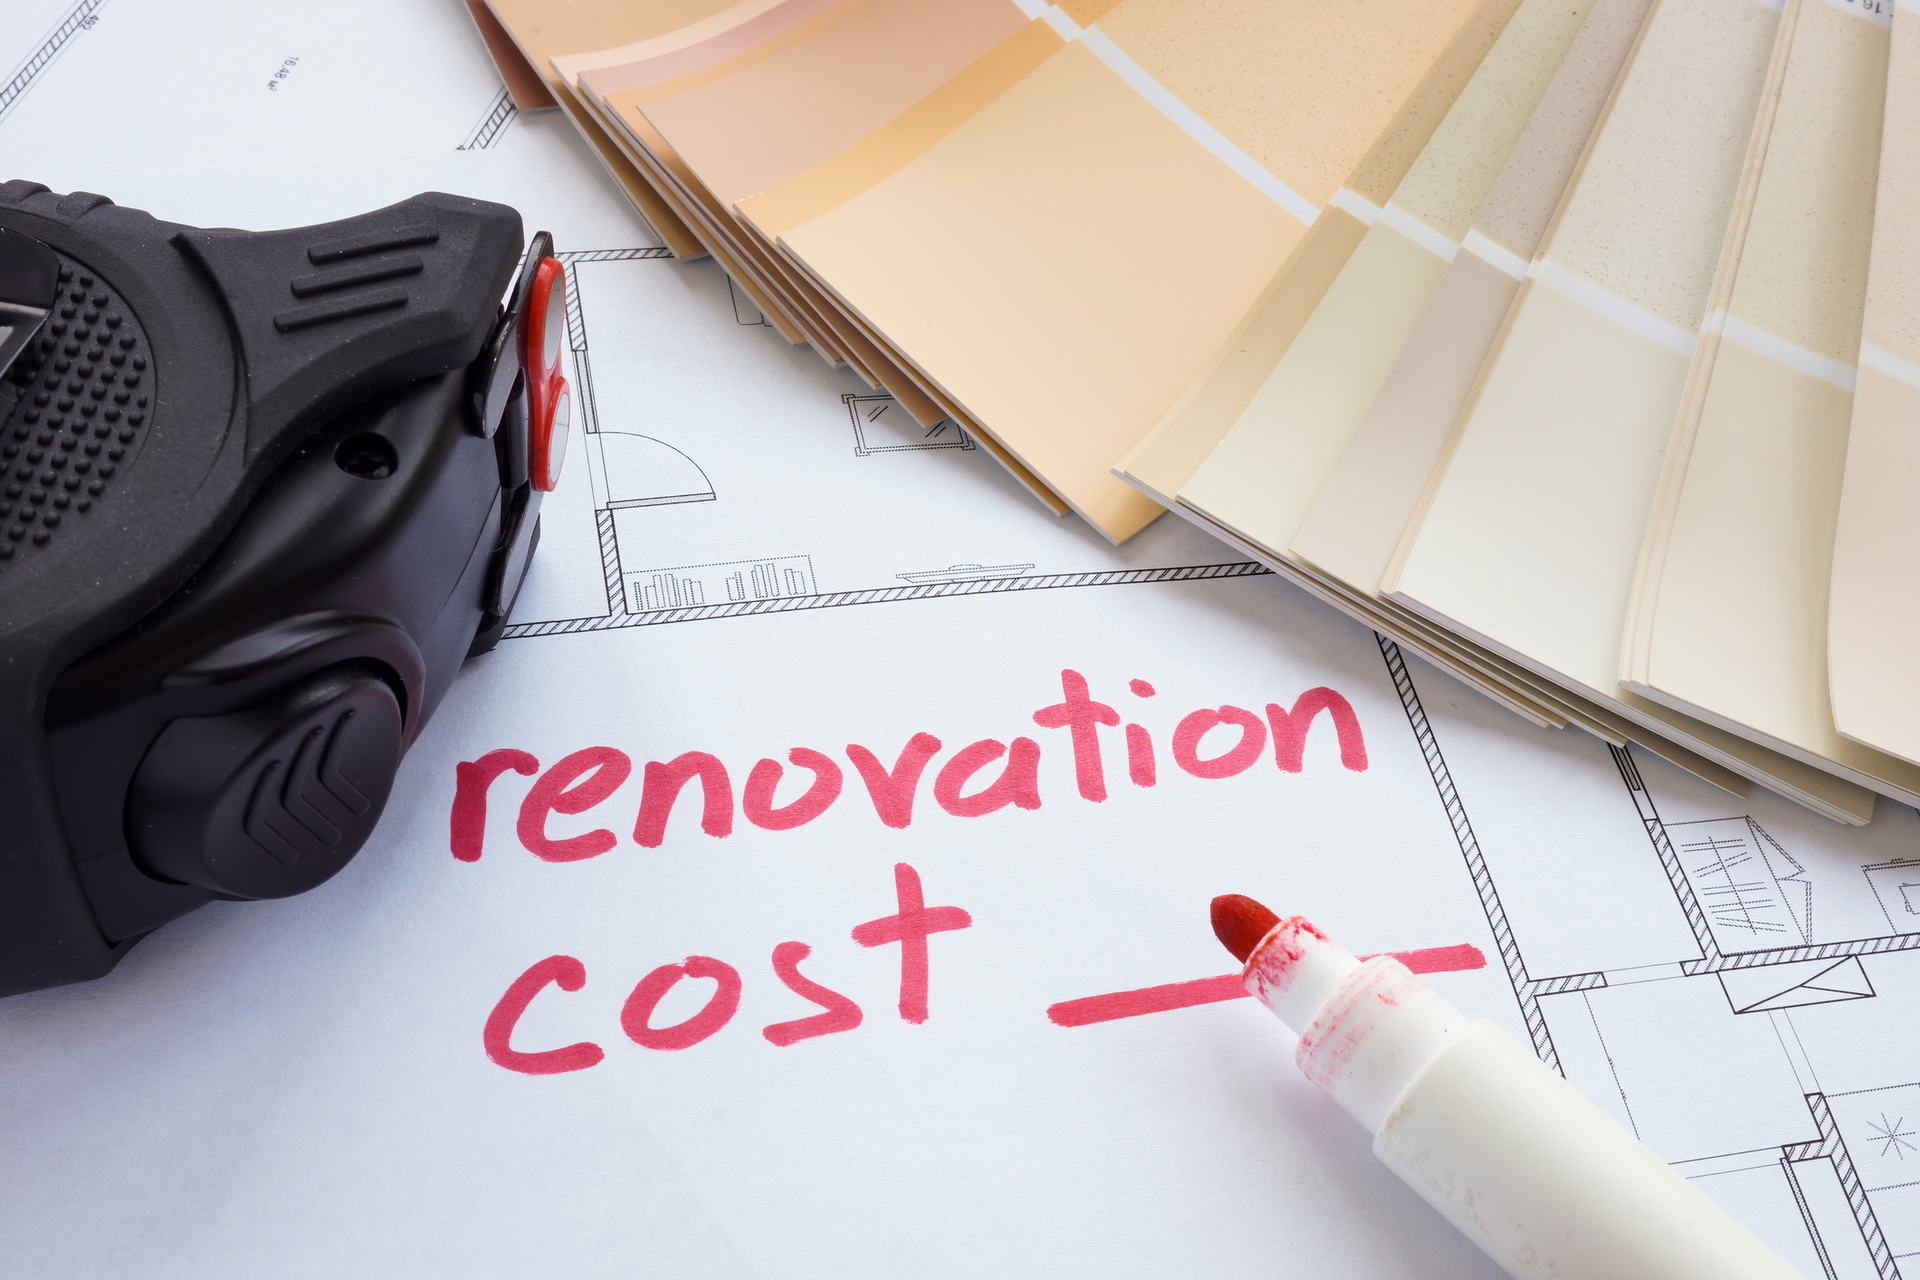 Home renovation cost